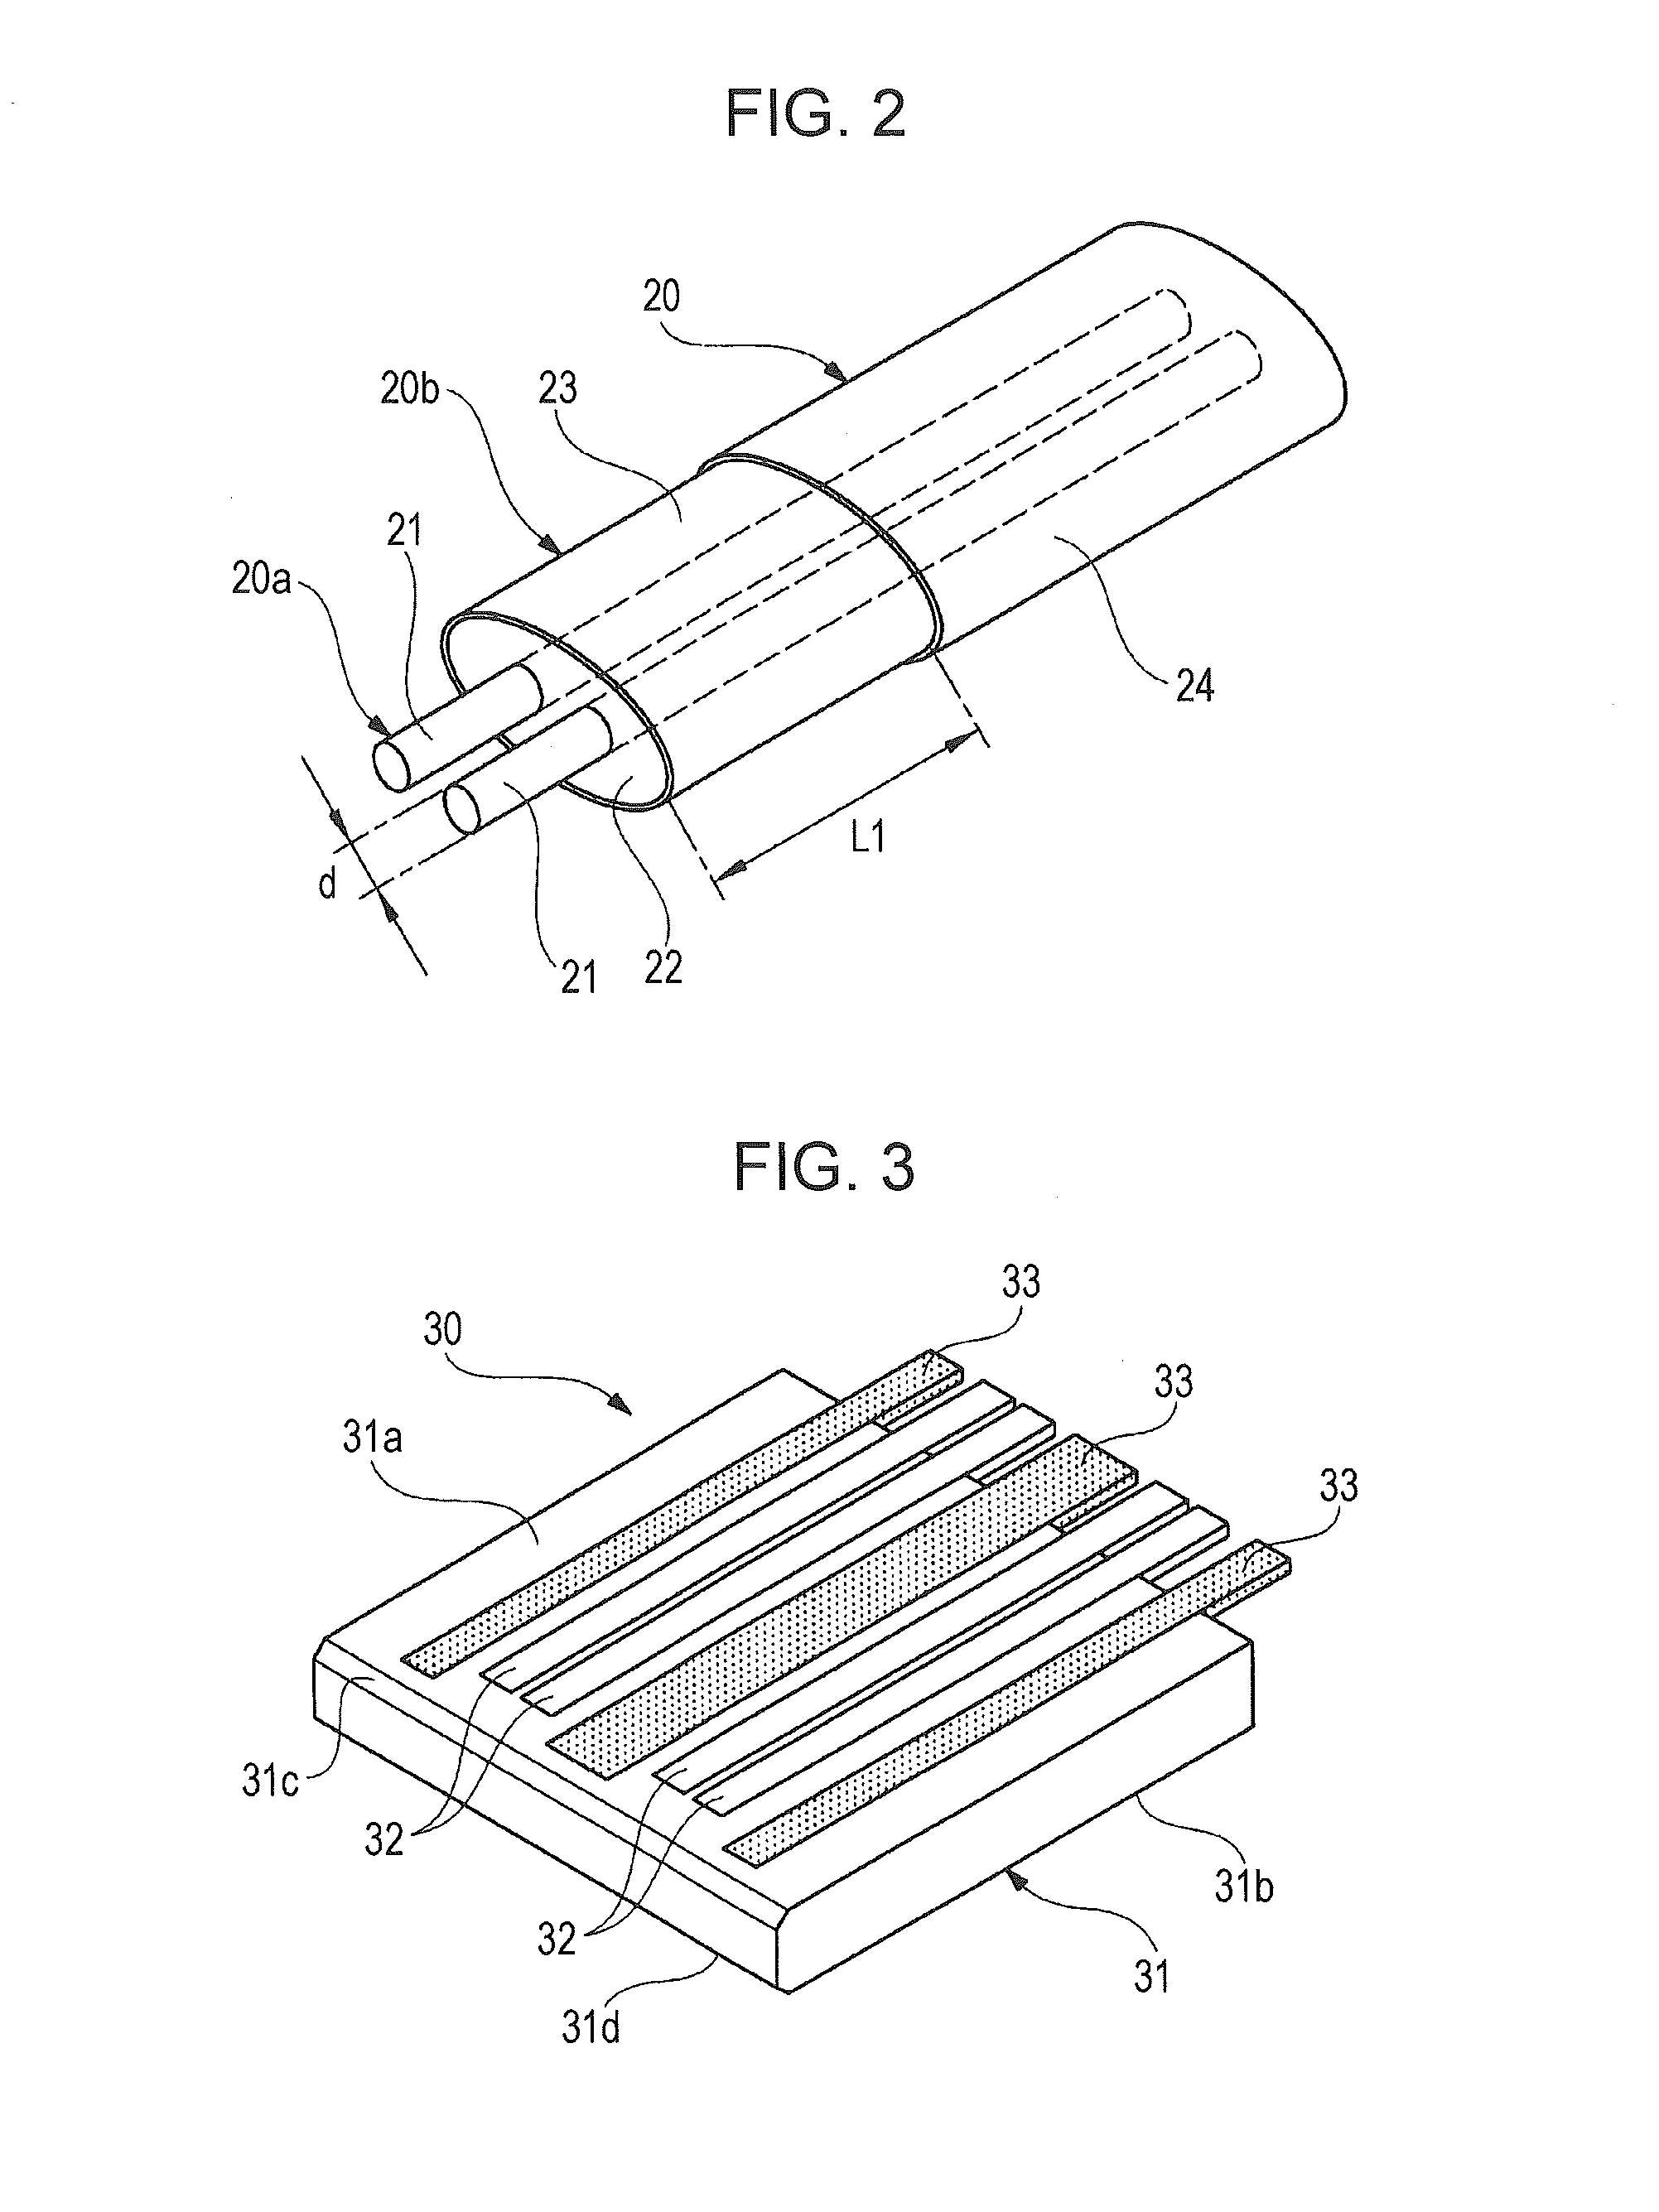 Cable connecting apparatus, cable assembly, and method of making cable assembly